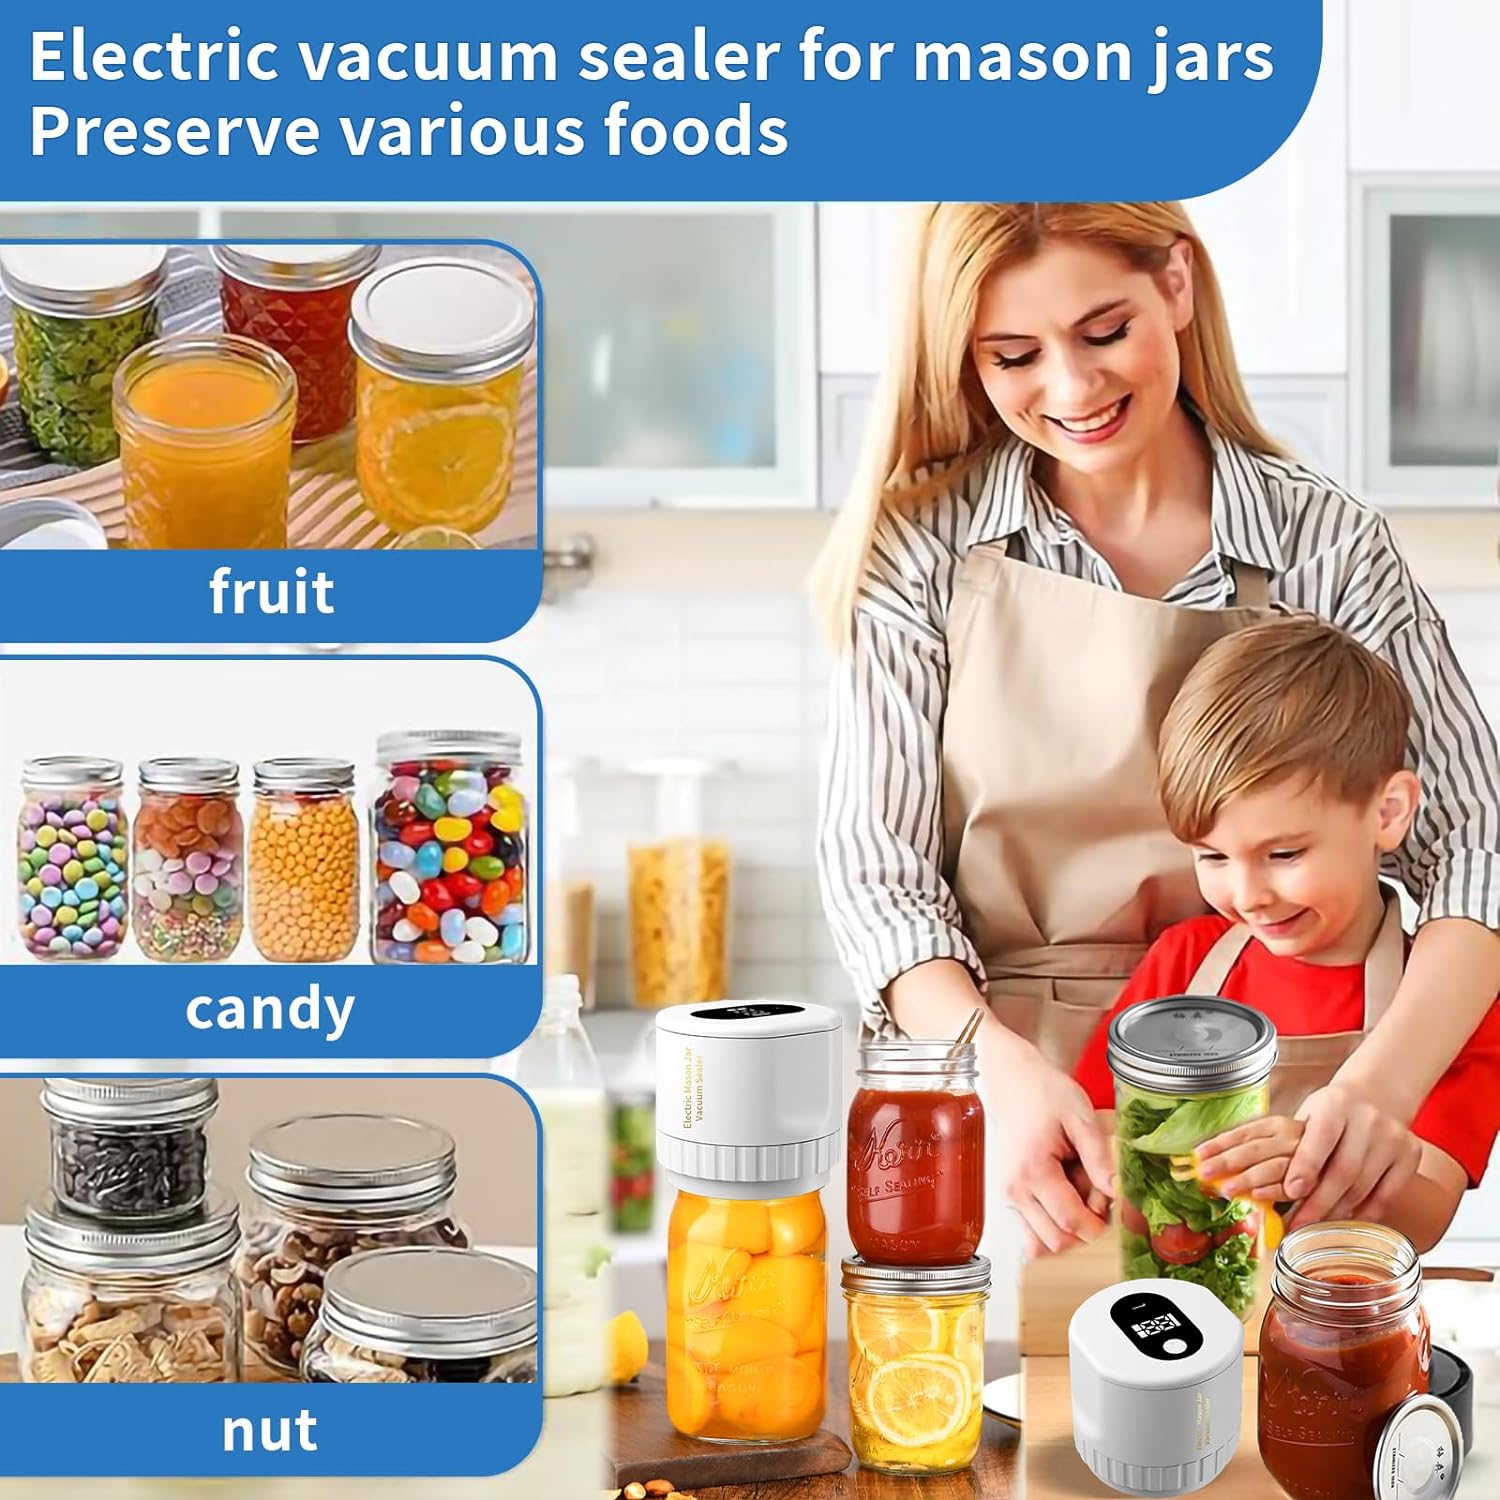 JHHJIFY Electric Mason Jar Vacuum Sealer, Strong Suction Vacuum Sealer for Canning Mason Jars with Wide & Regular Mouth, Vacuum Sealing Machine for Food Storage and Fermentation